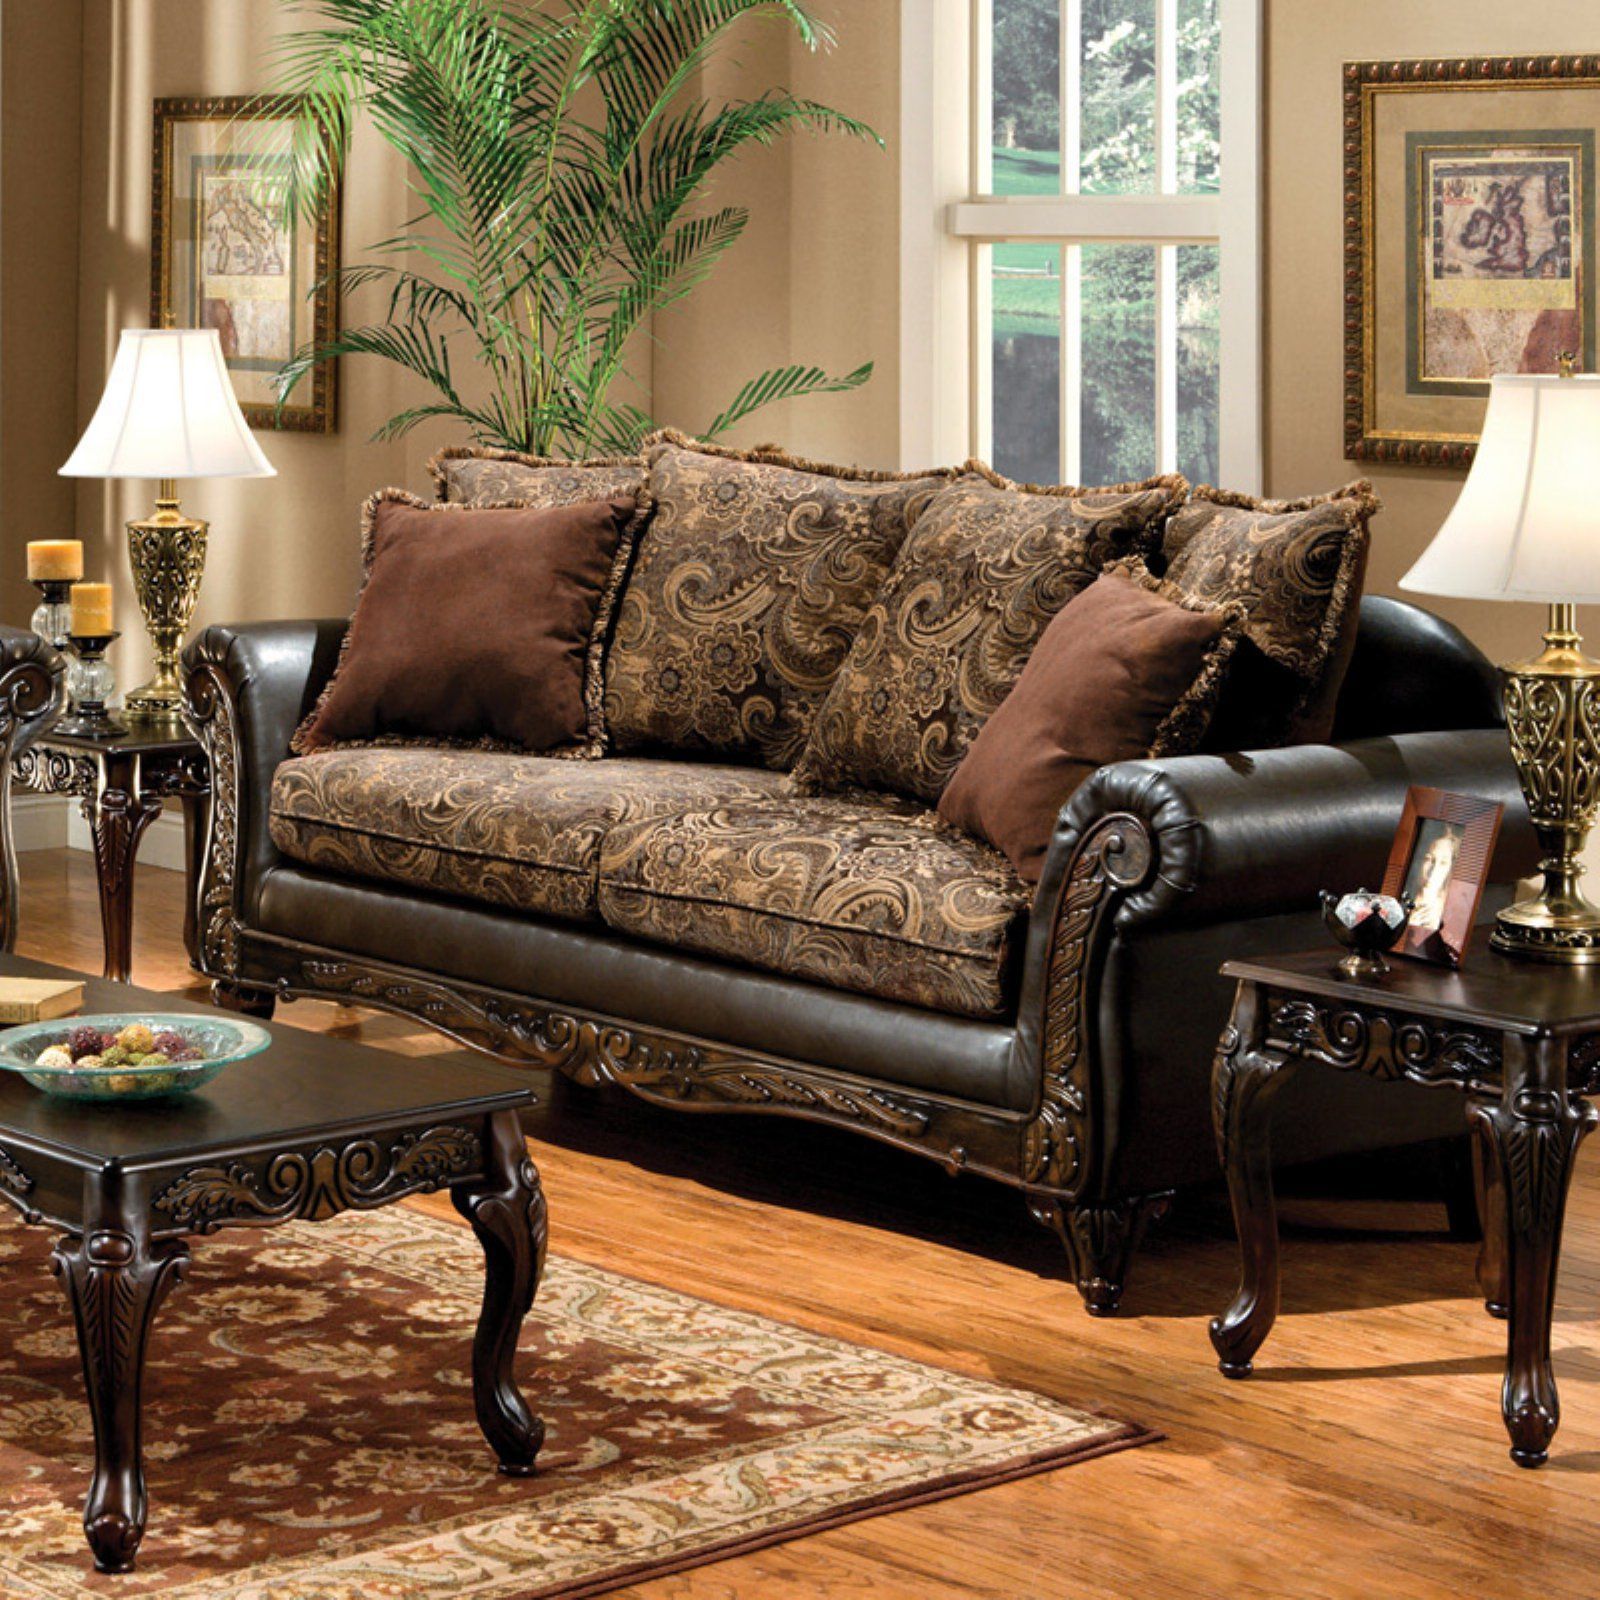 Furniture Of America Doria Fabric And Leatherette Sofa Set – Floral Regarding Sofas In Pattern (Gallery 19 of 20)